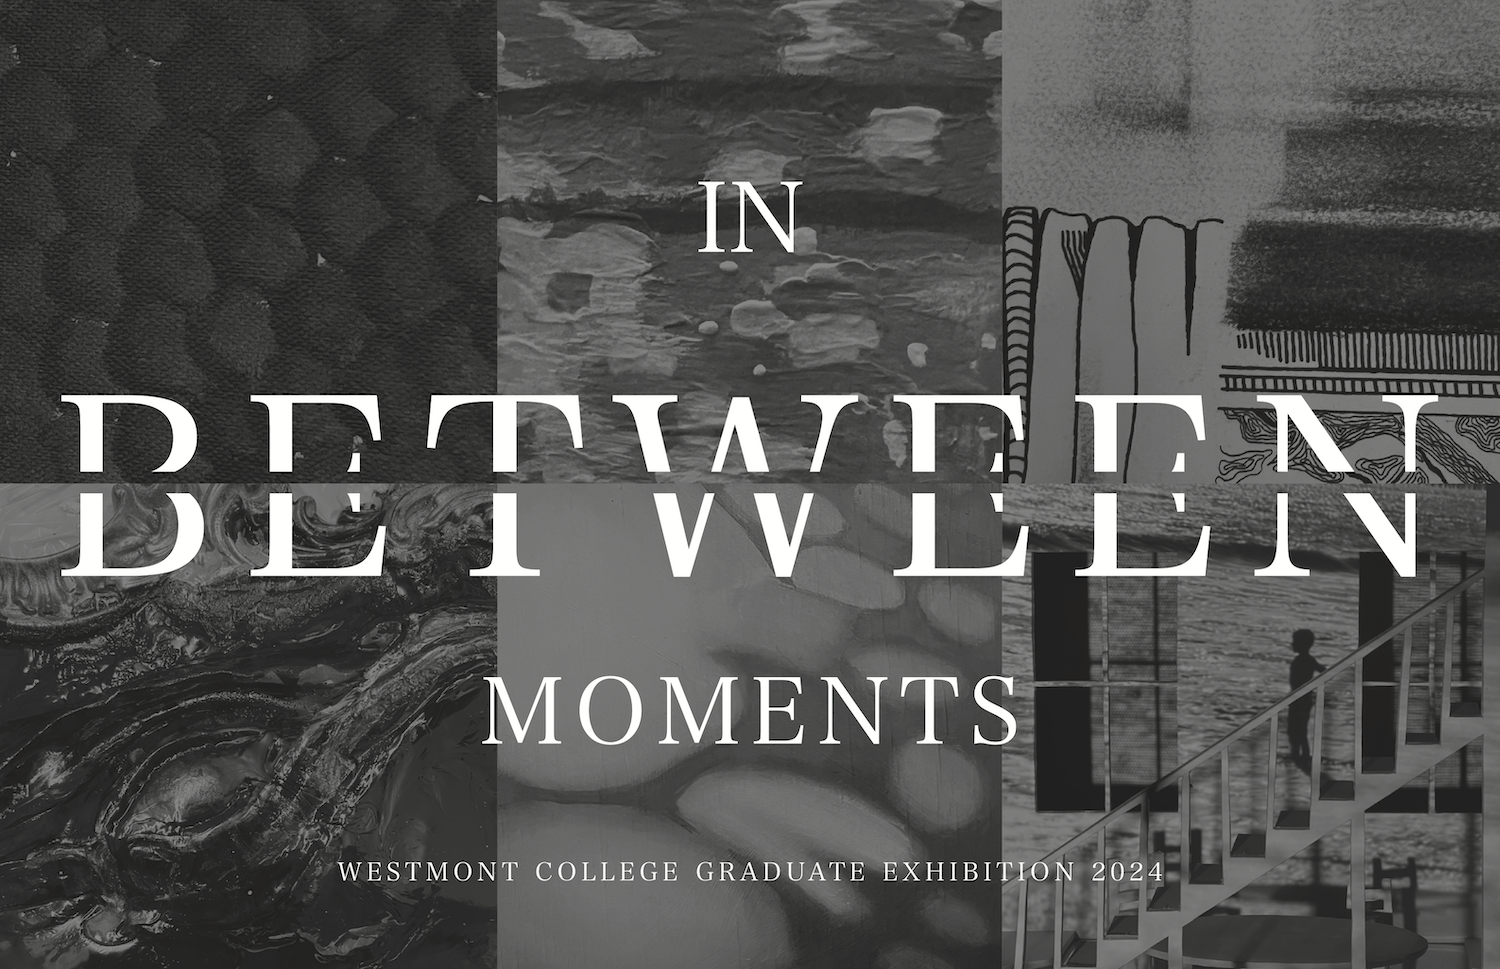 Black and white images with the text "In Between Moments."